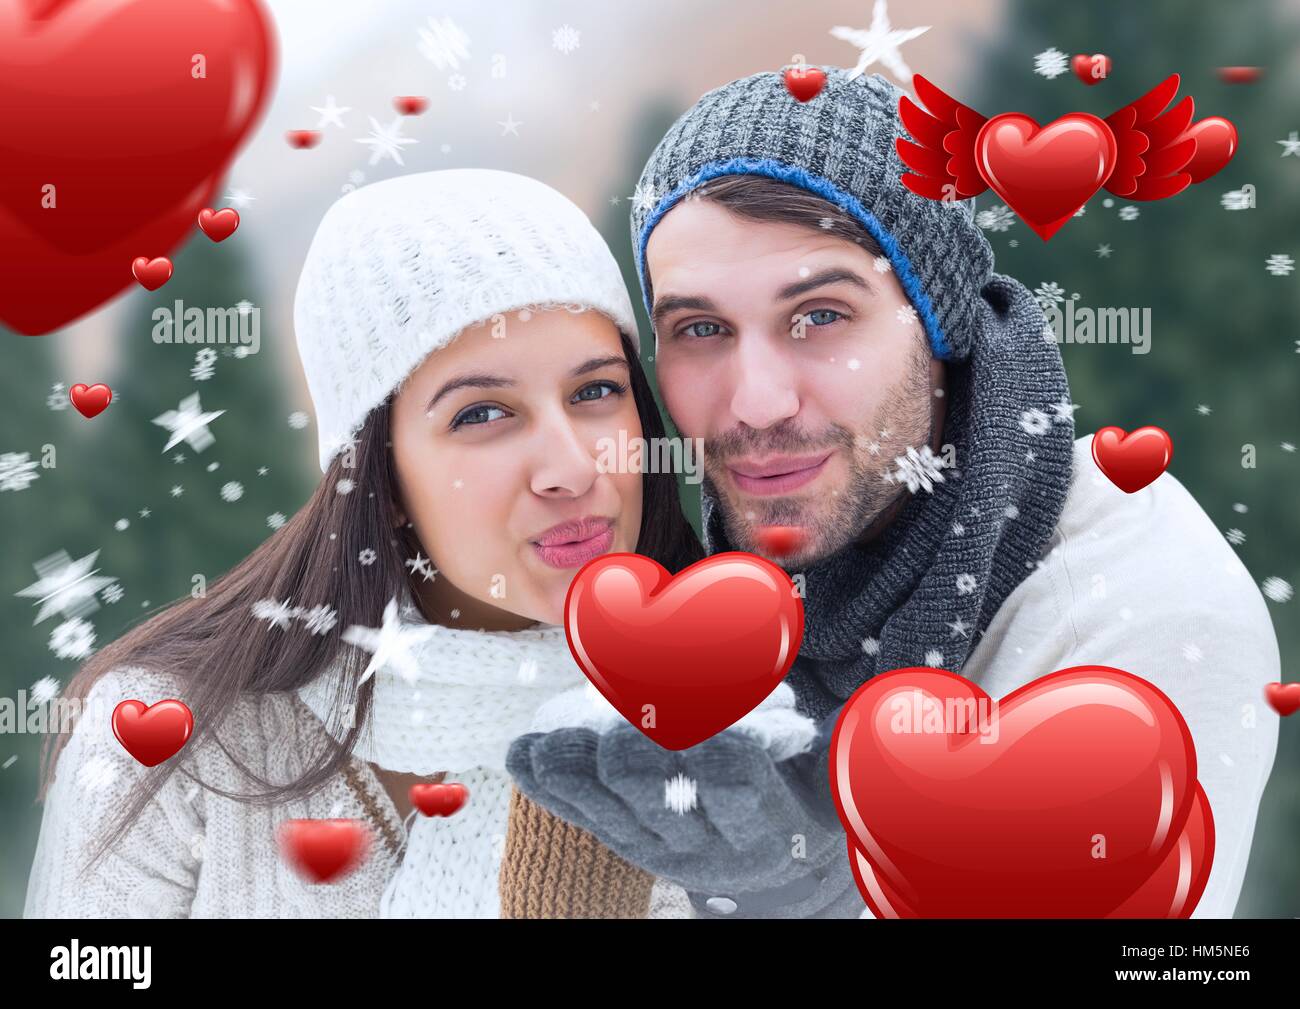 Flying Kiss High Resolution Stock Photography and Images - Alamy